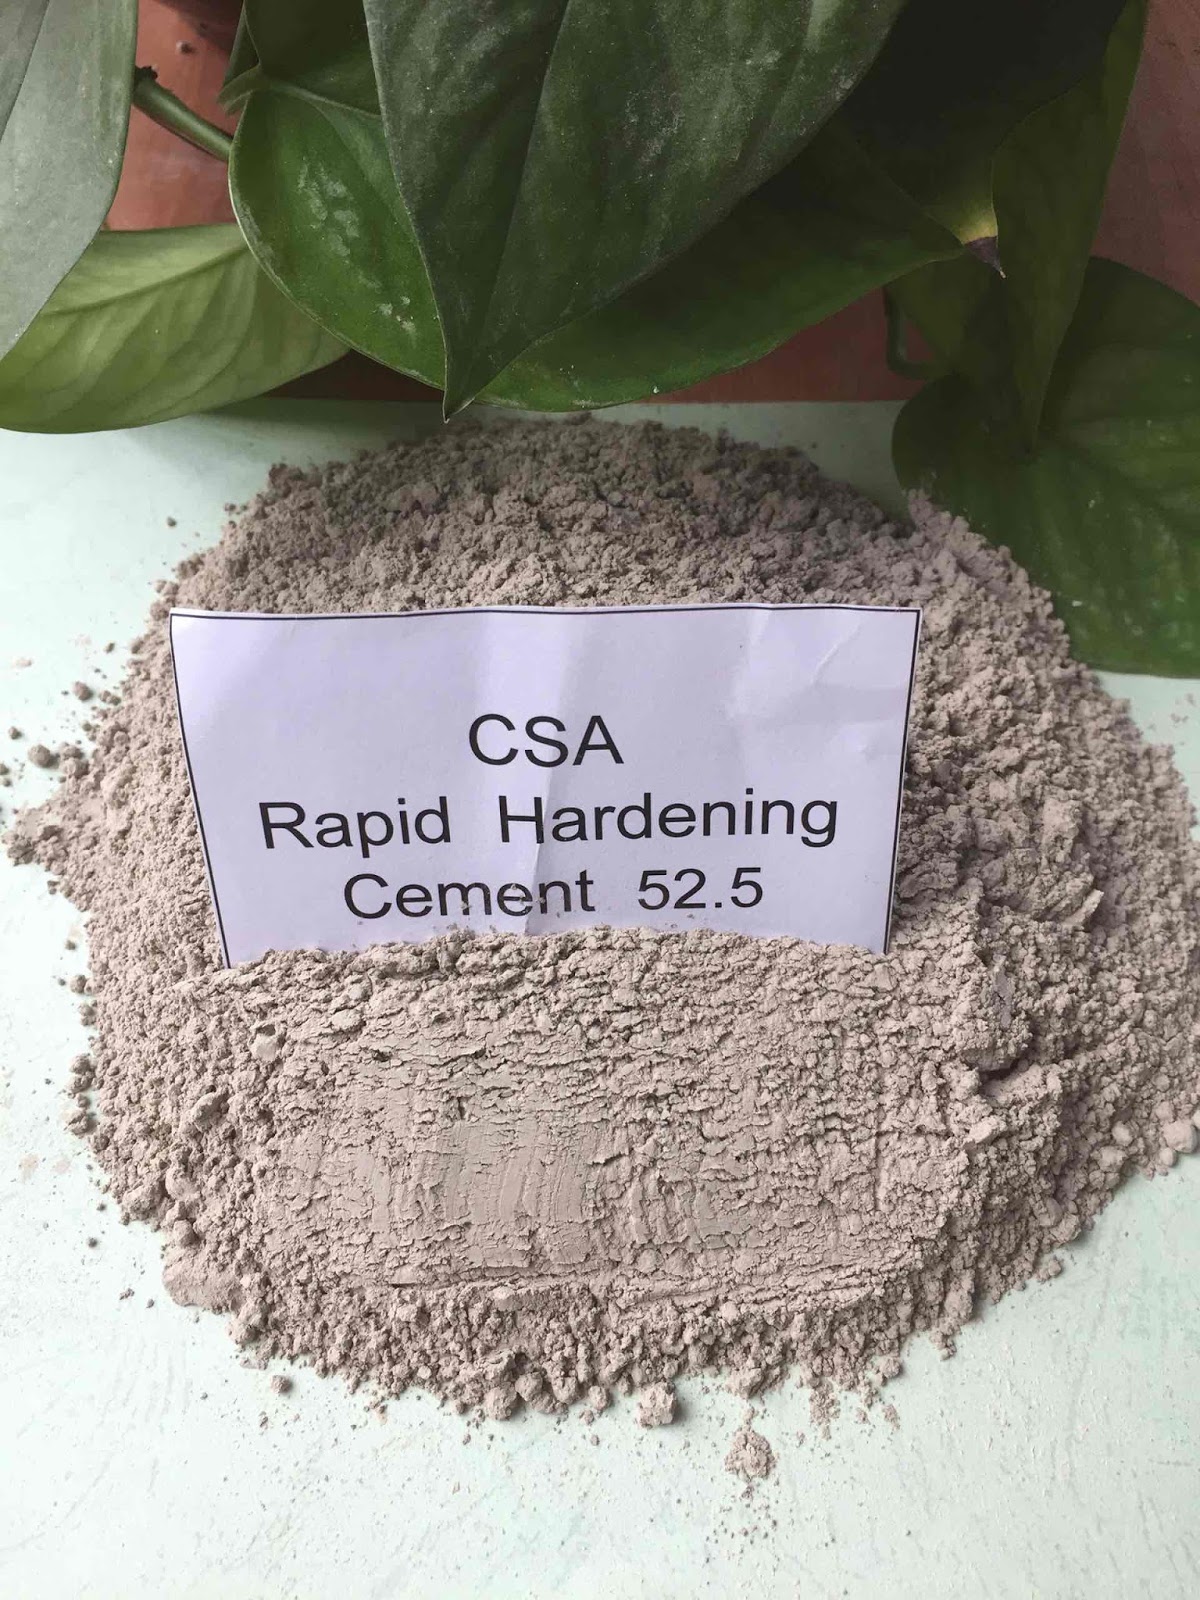 Specialty cement technology-Rapid set CSA cement, High performance of